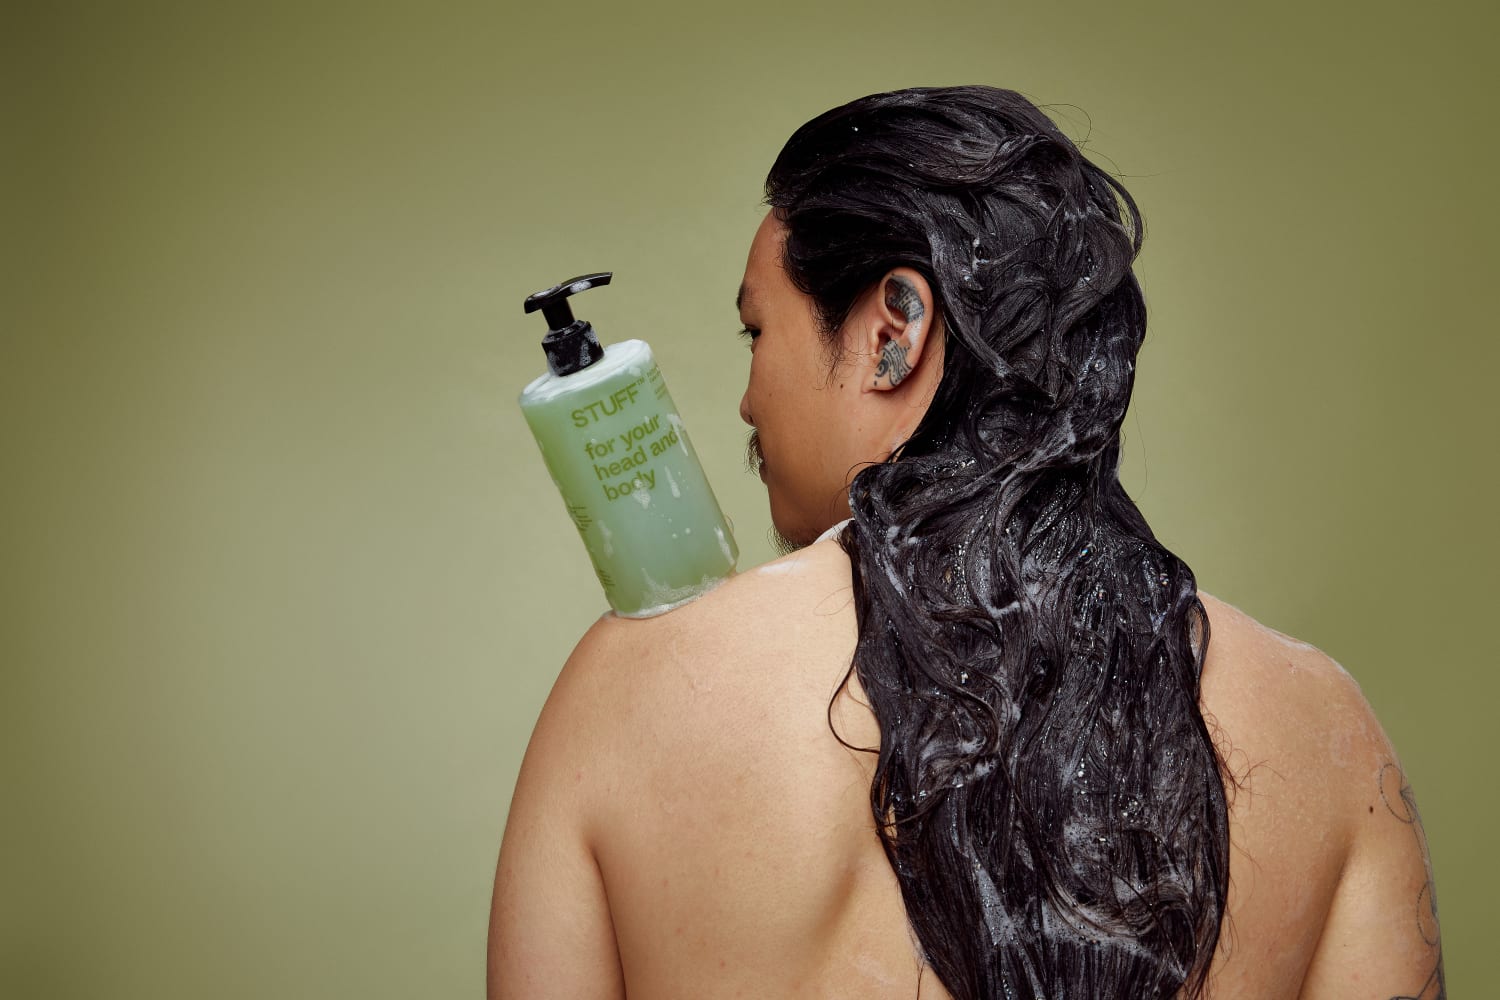 A male with long wet dark hair has his back to the camera with a bottle branded Stuff on his shoulder